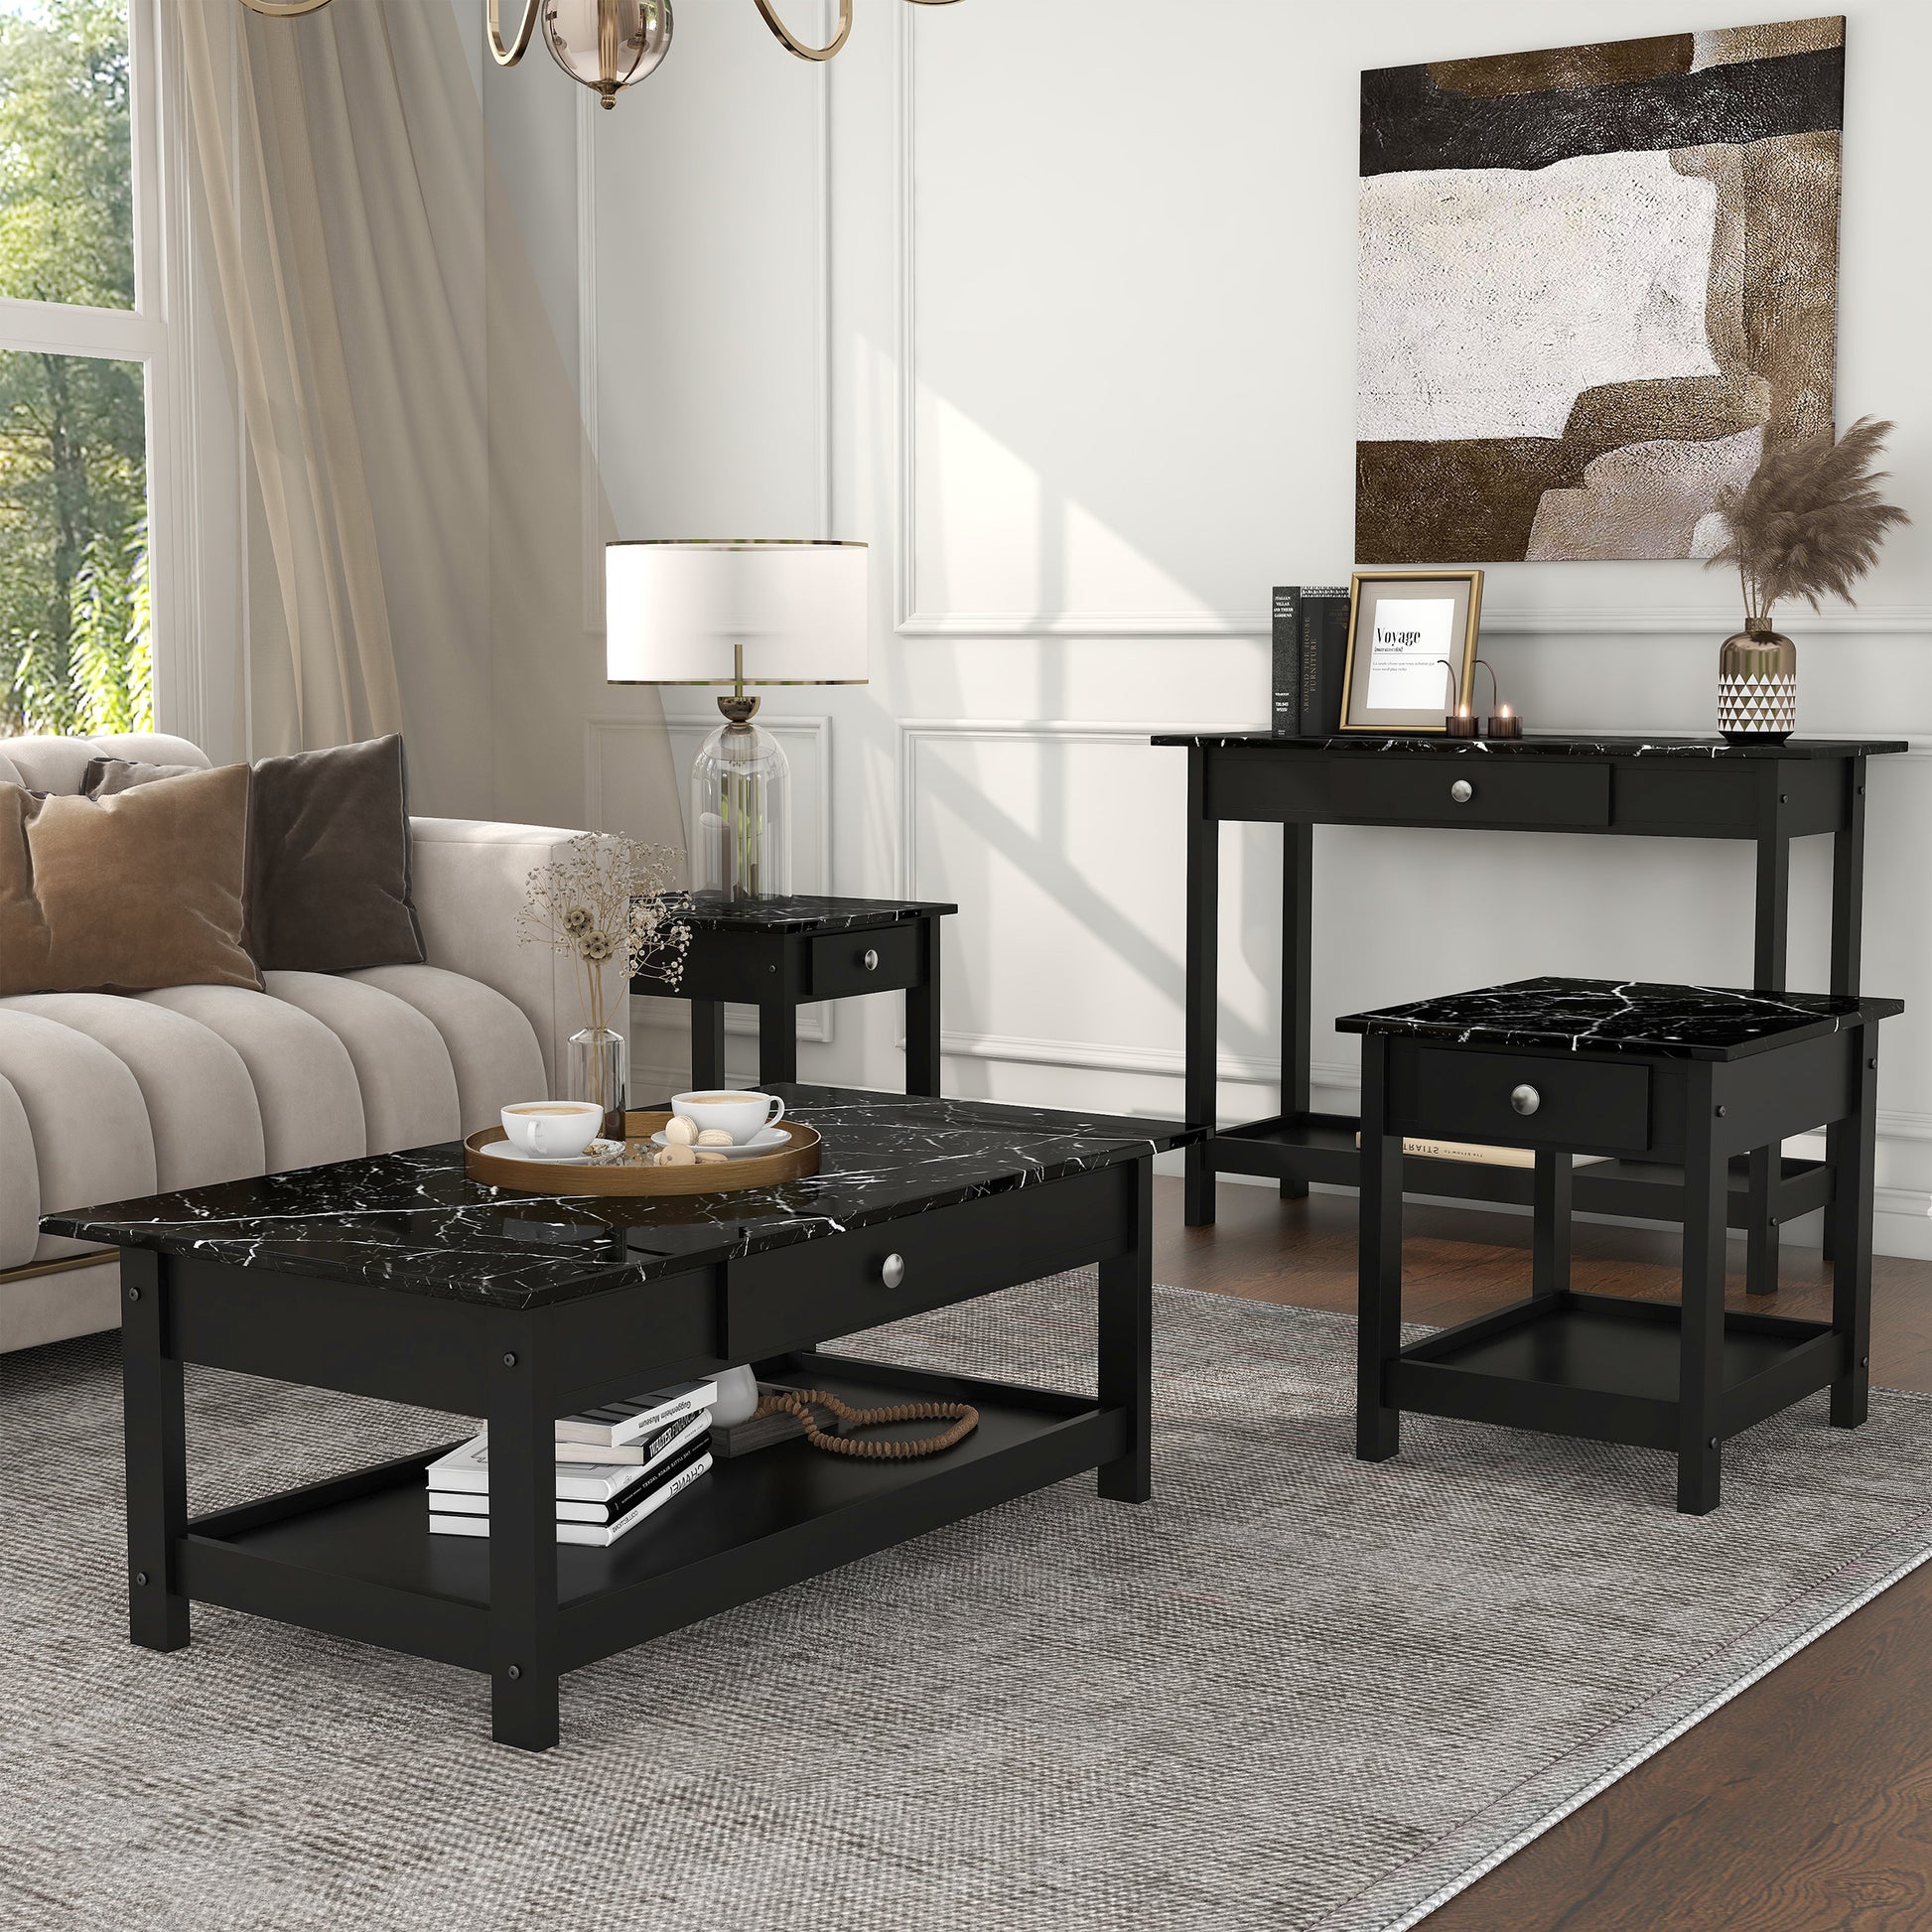 Right angled four-piece modern black and faux marble coffee table set with lower shelves in a living area with accessories